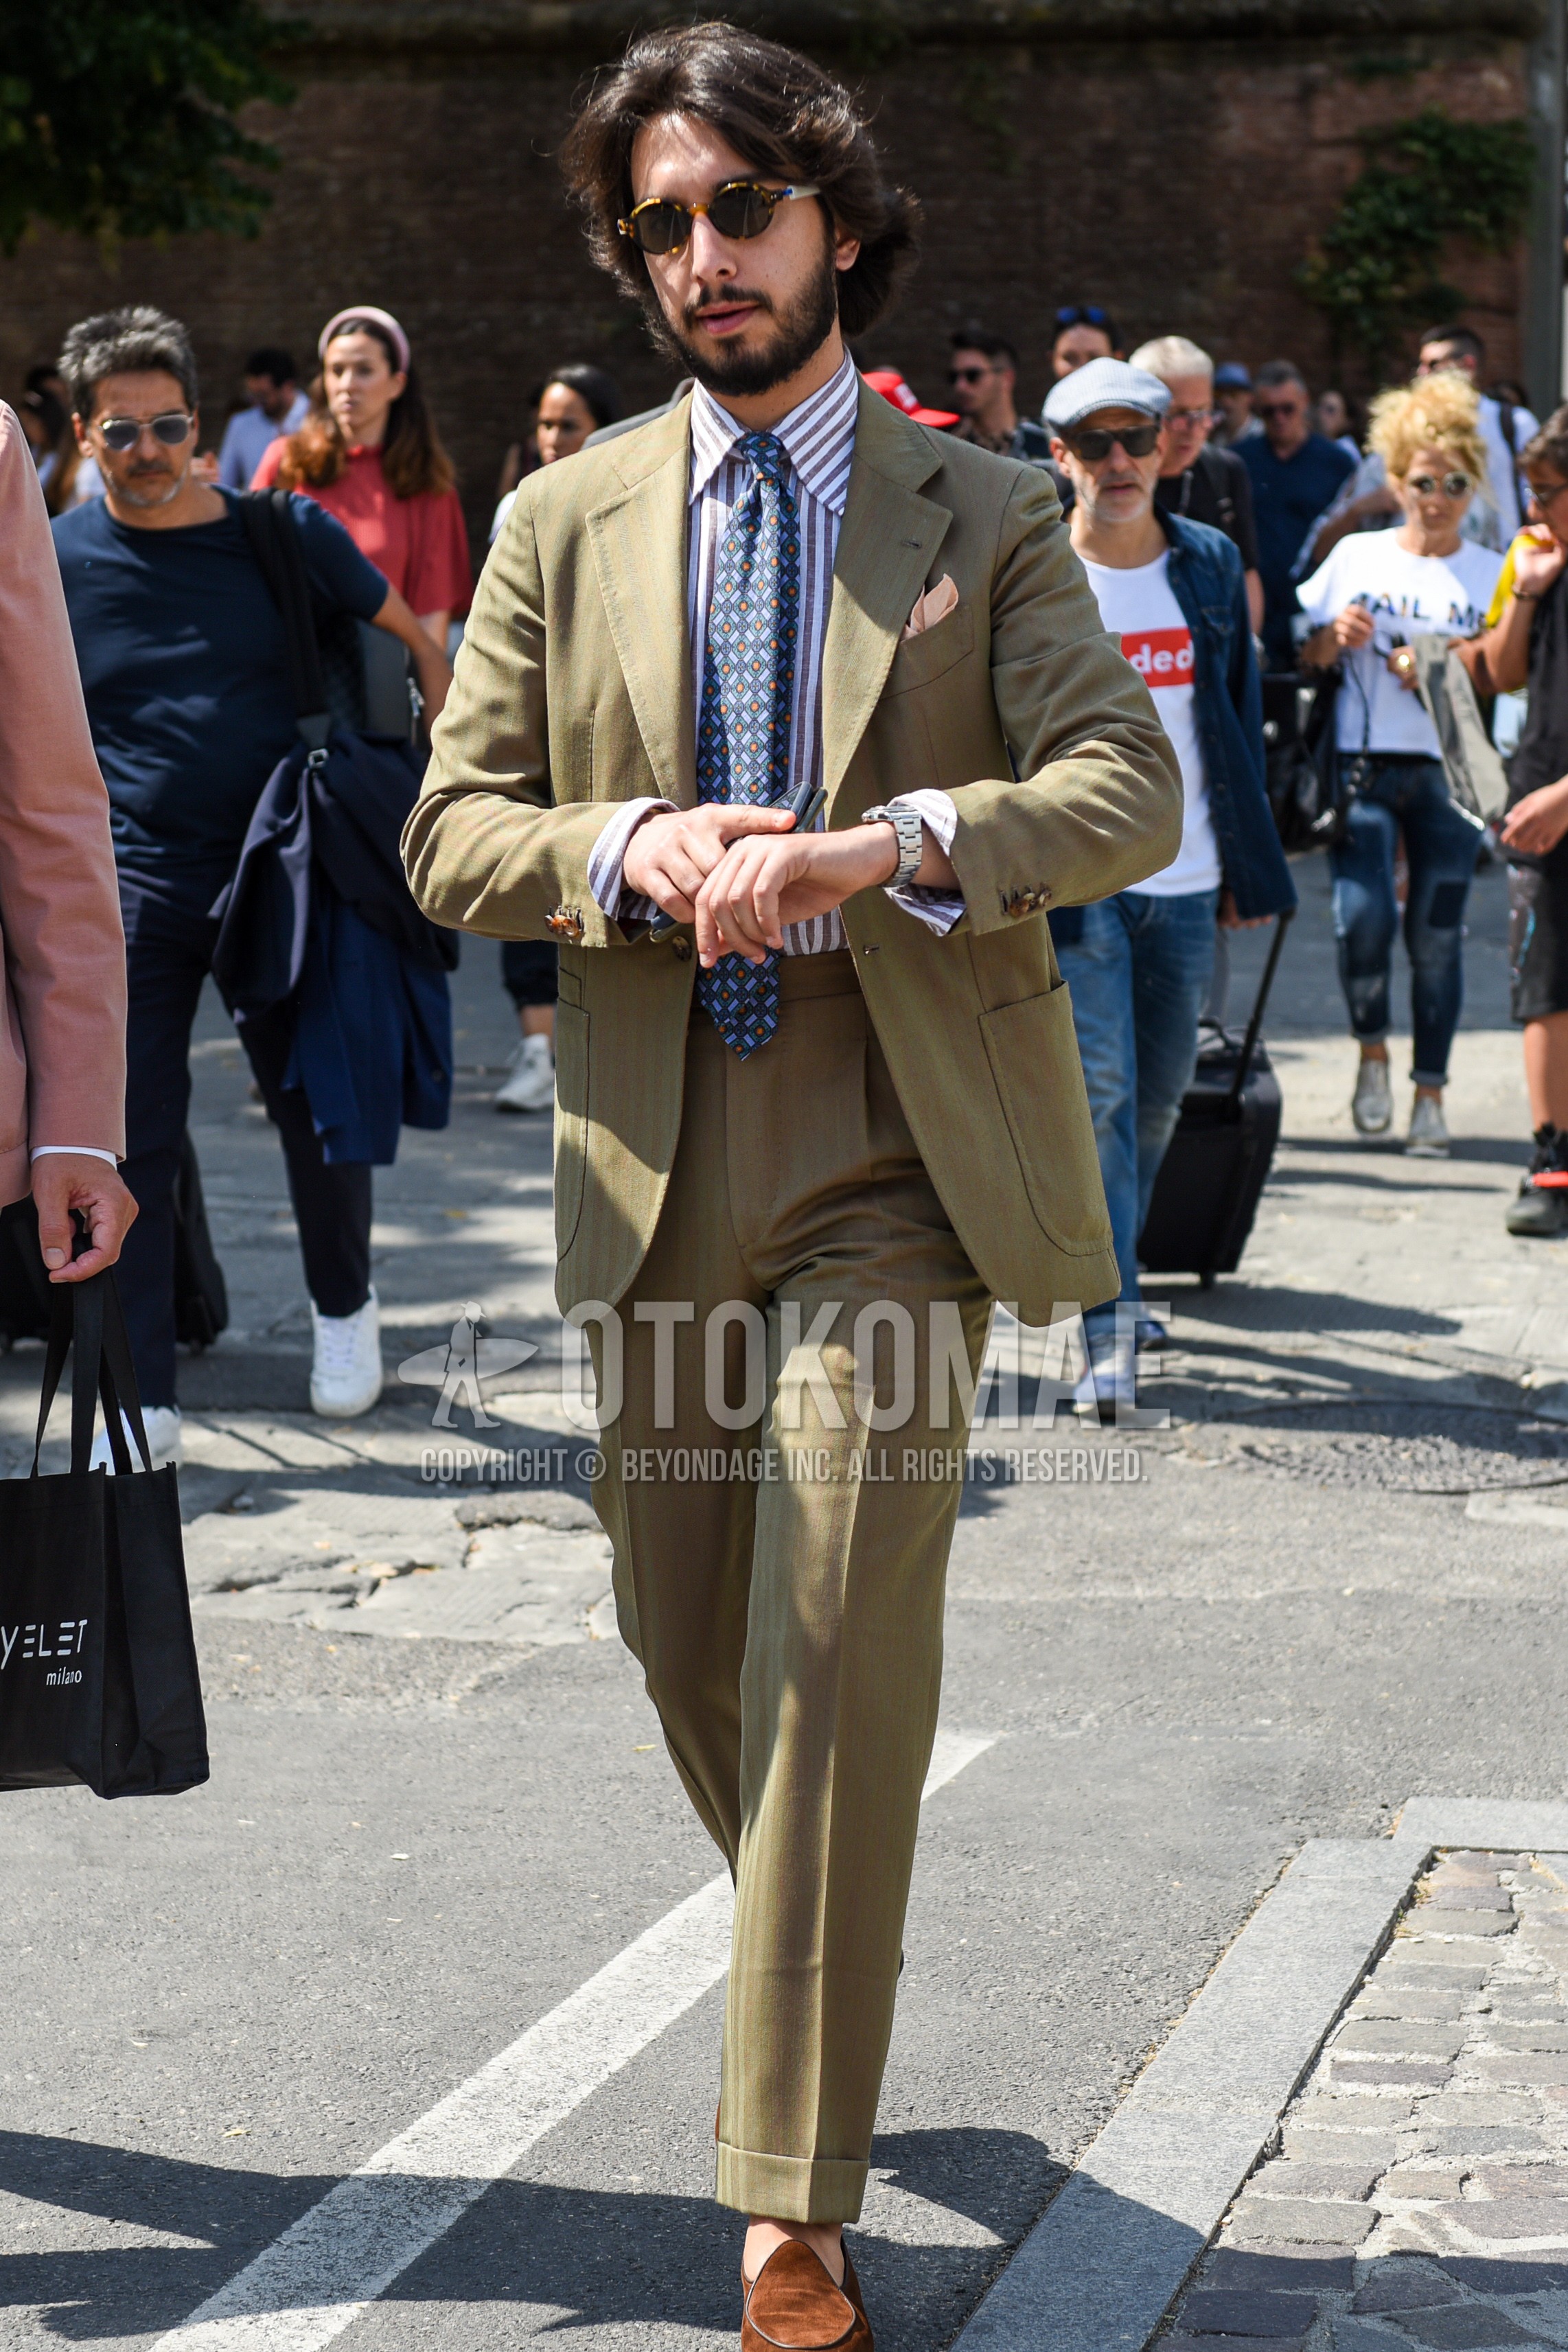 Men's spring autumn outfit with black tortoiseshell sunglasses, white beige stripes shirt, brown  loafers leather shoes, blue necktie necktie.